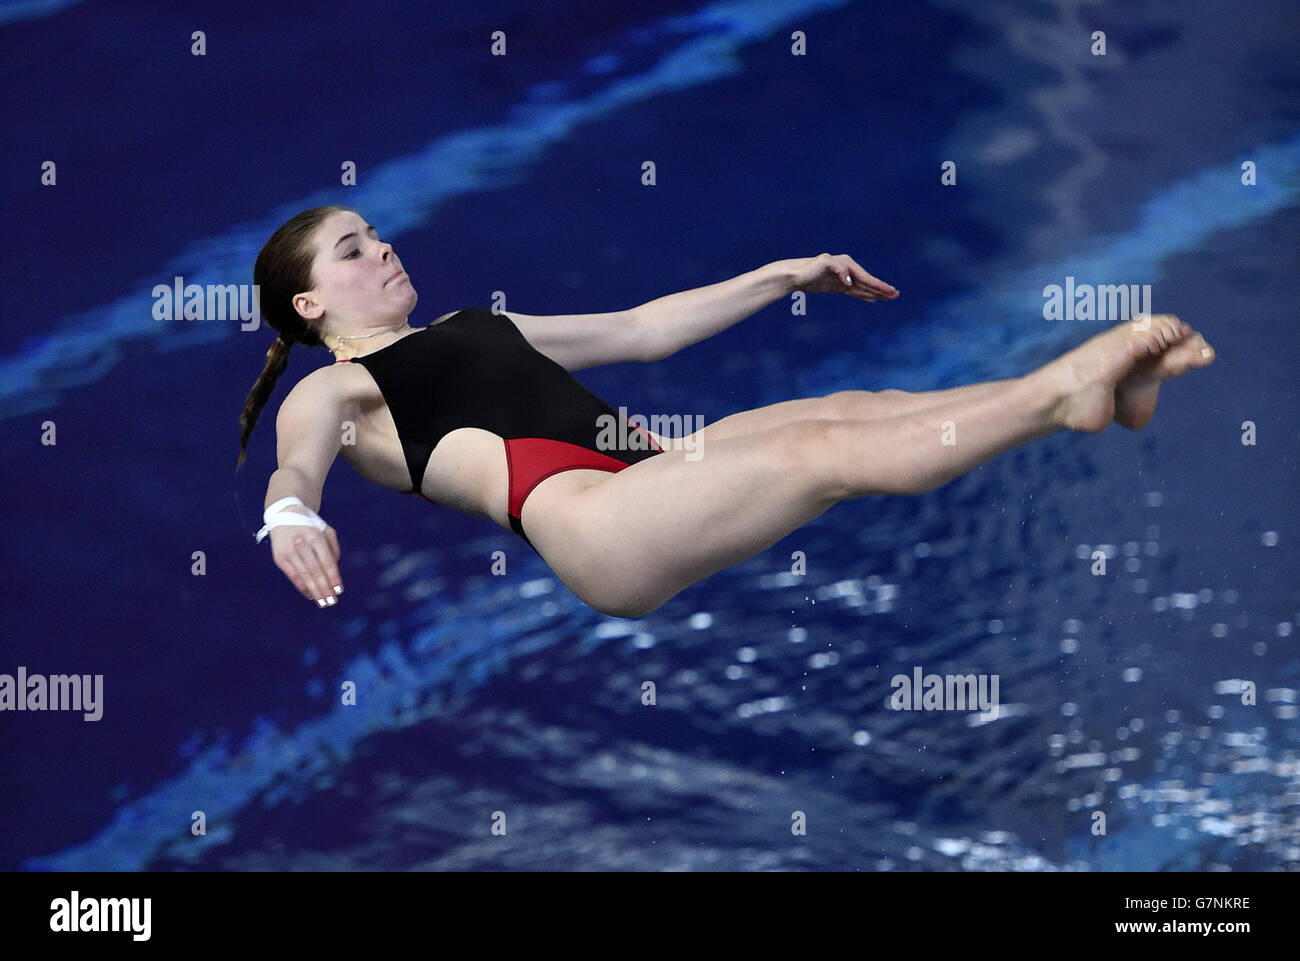 City of Leeds Diving Club's Katehrine Torrance during the Women's 1m preliminary round during day one of the British Gas Diving Championships at The Plymouth Life Centre, Plymouth. Stock Photo